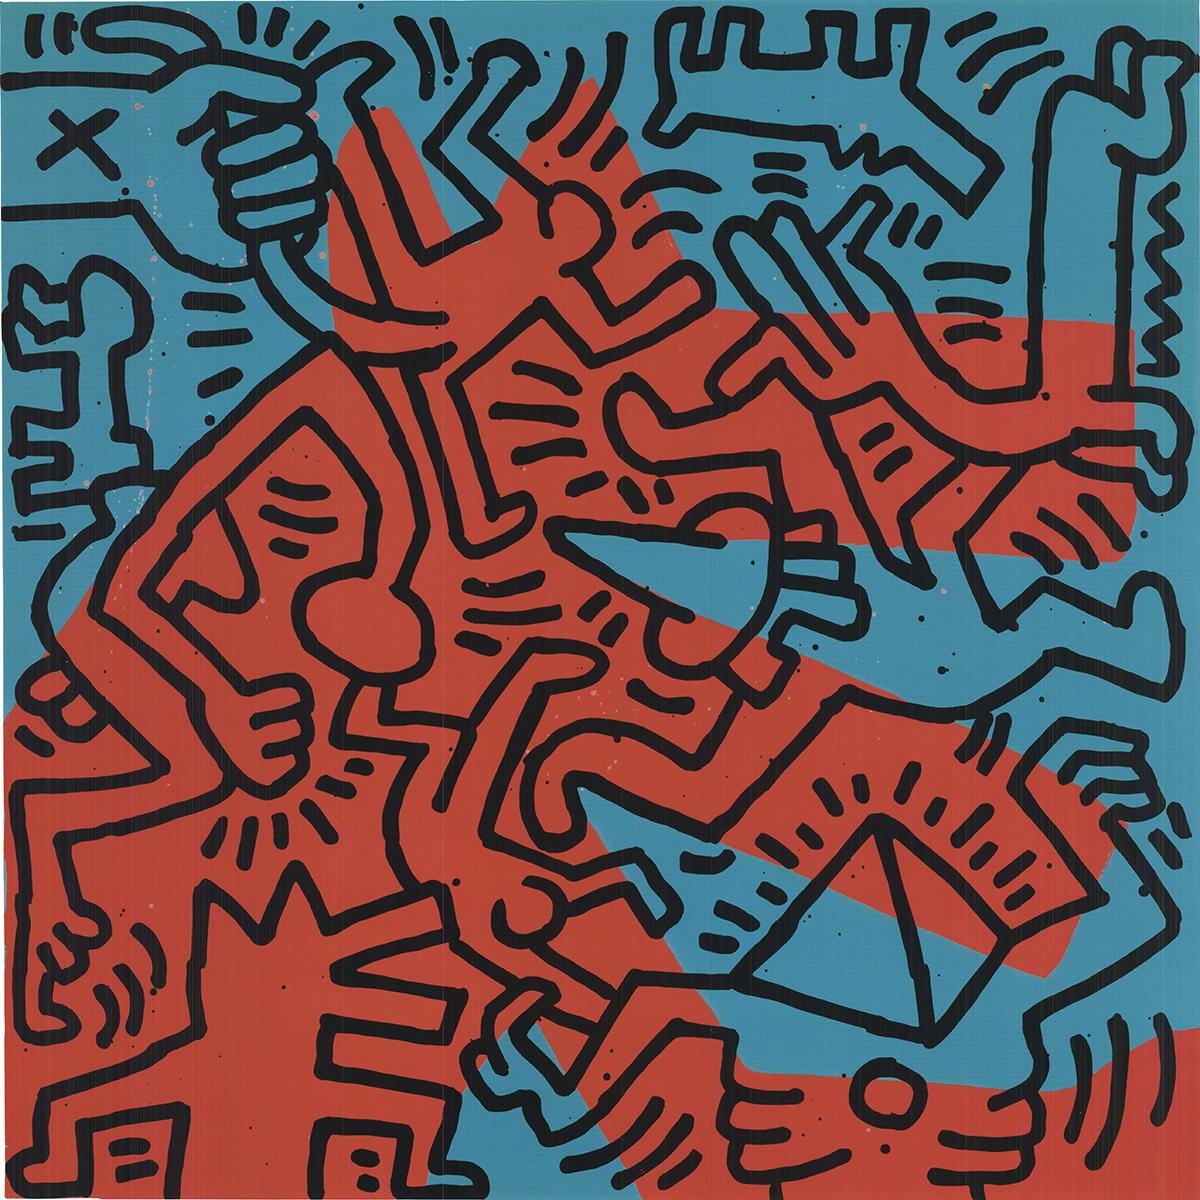 Offsetlithographie „Ohne Titel, 1984“, Keith Haring 2009- Offsetlithographie im Angebot 1